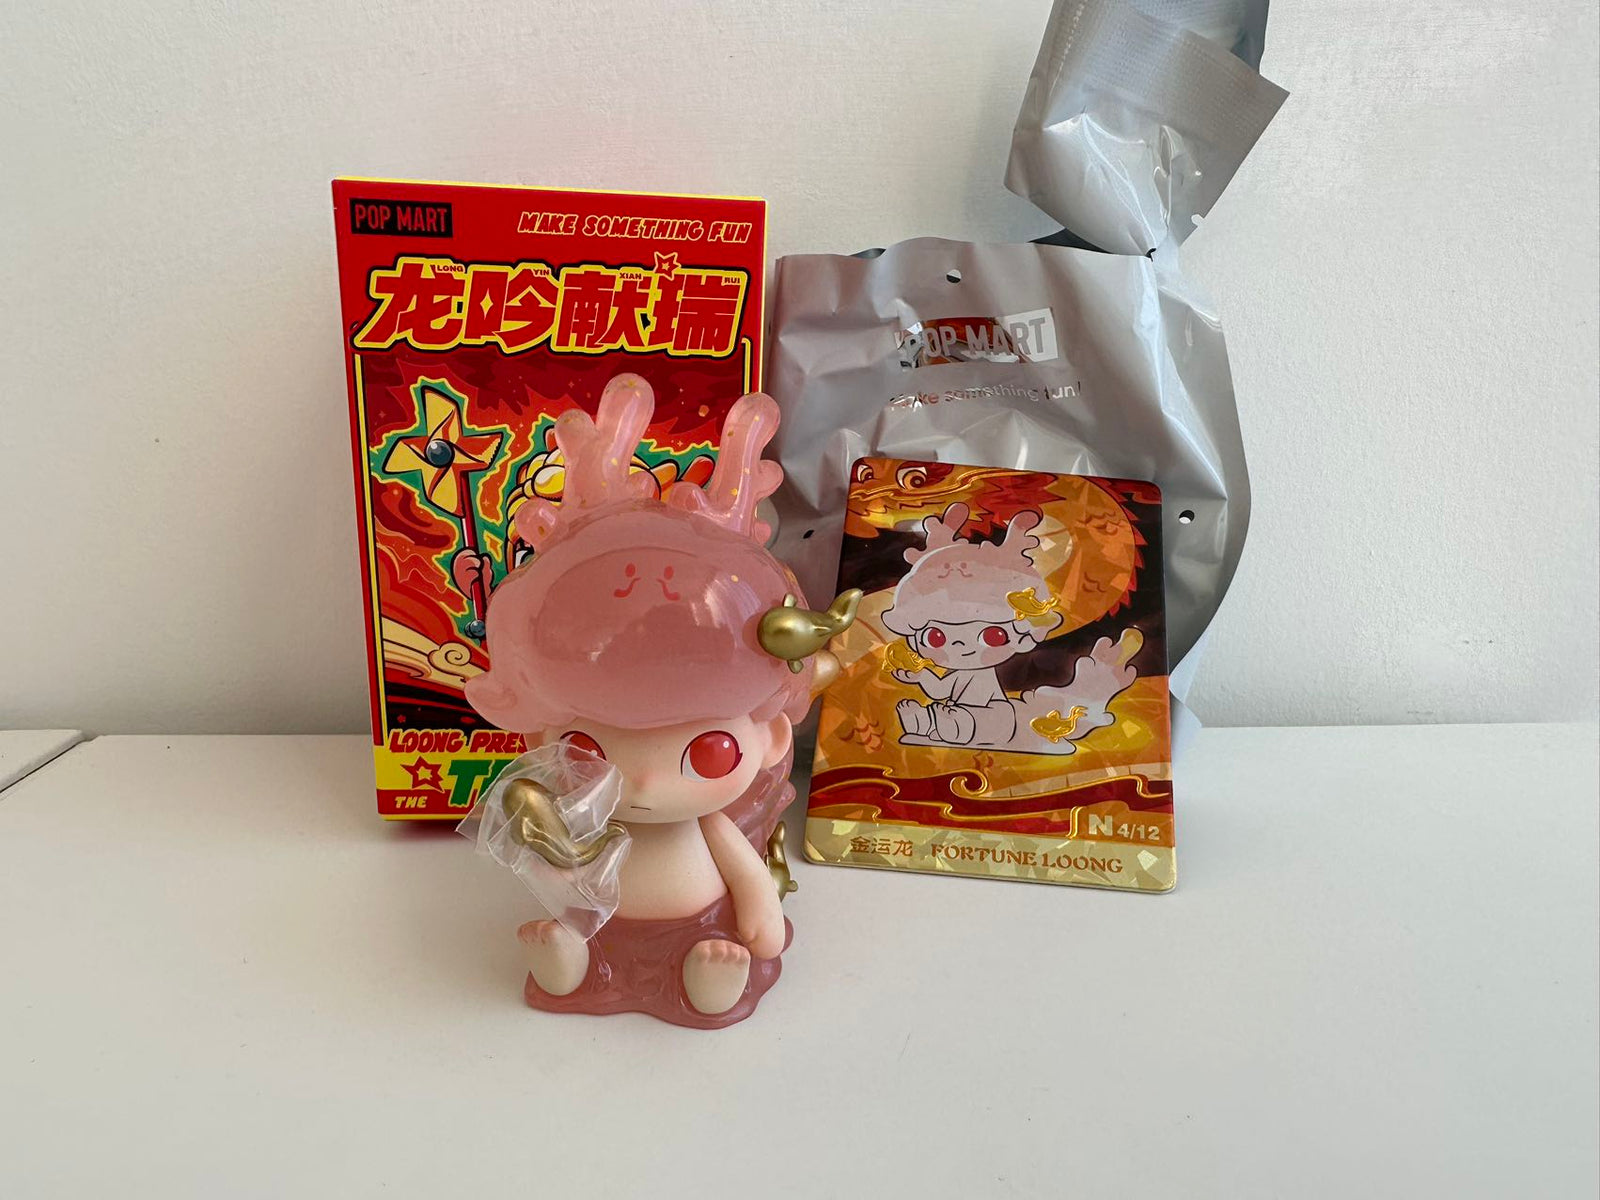 (DIMOO) FORTUNE LOONG - Loong Presents the Treasure Series Figures by POP MART - 1